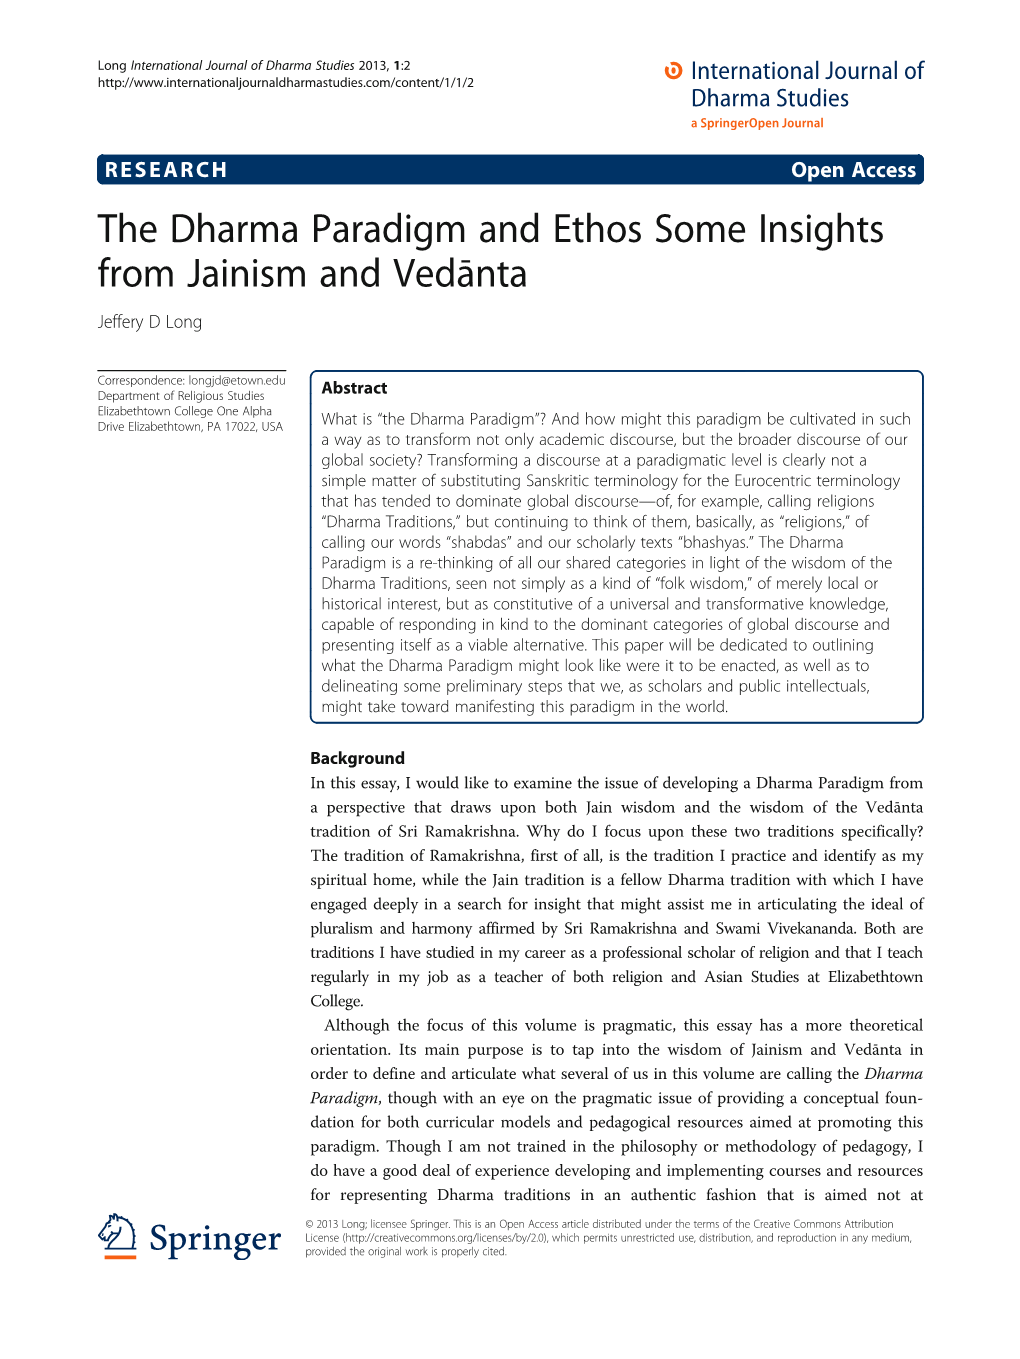 The Dharma Paradigm and Ethos Some Insights from Jainism and Vedānta Jeffery D Long